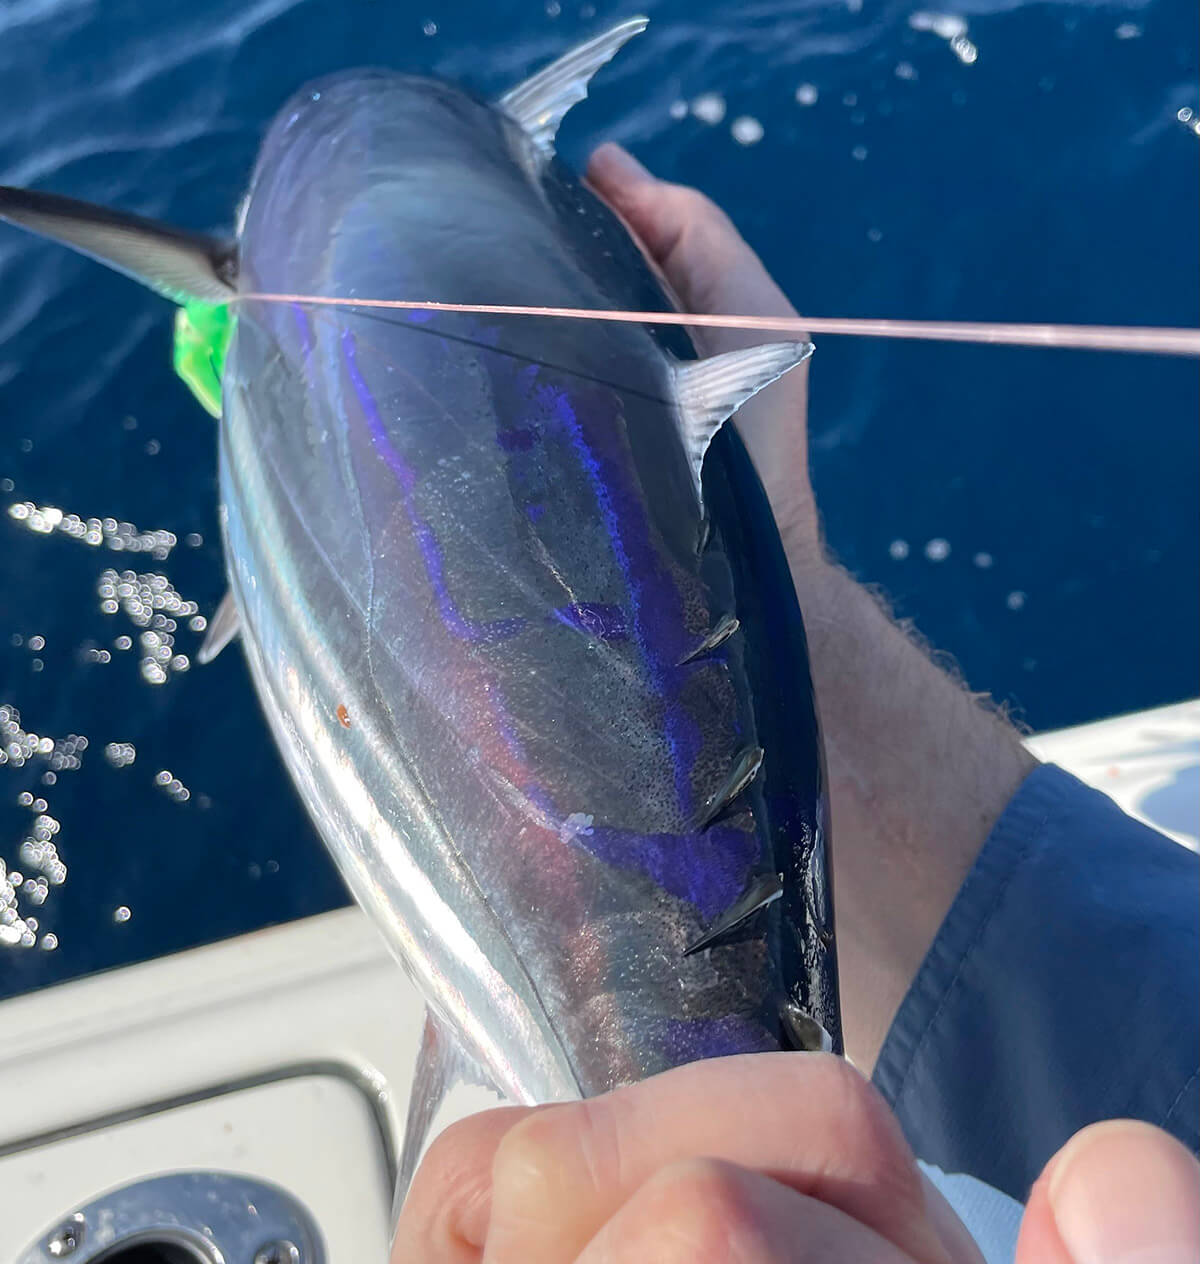 Everything You Need to Know About Skipjack Tuna - Florida Sportsman